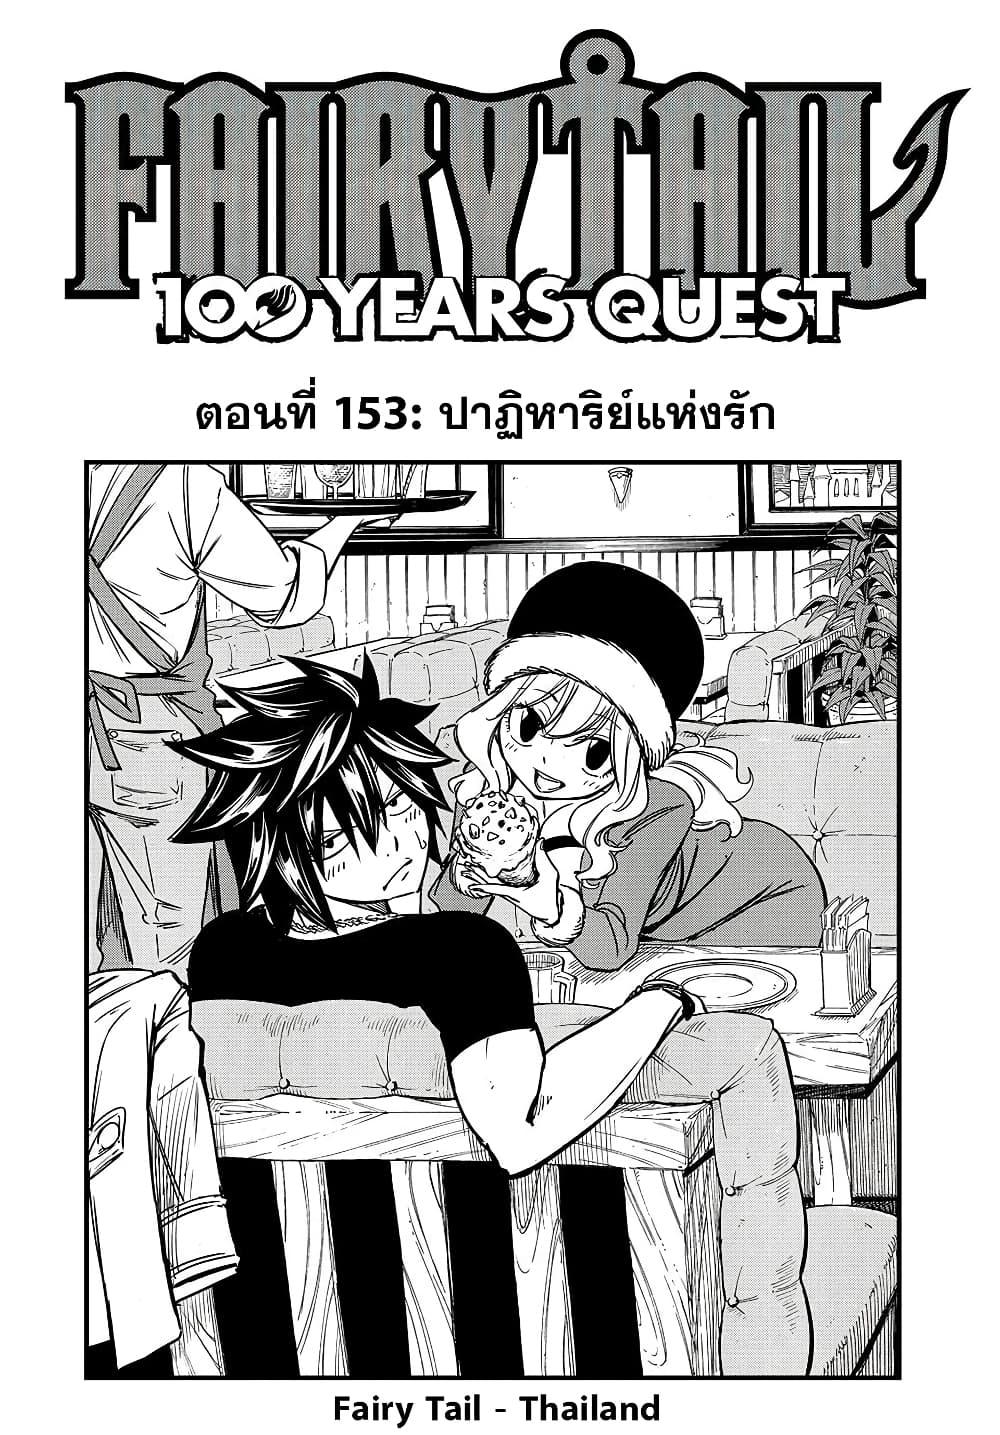 Fairy Tail 100 Years Quest 153 01